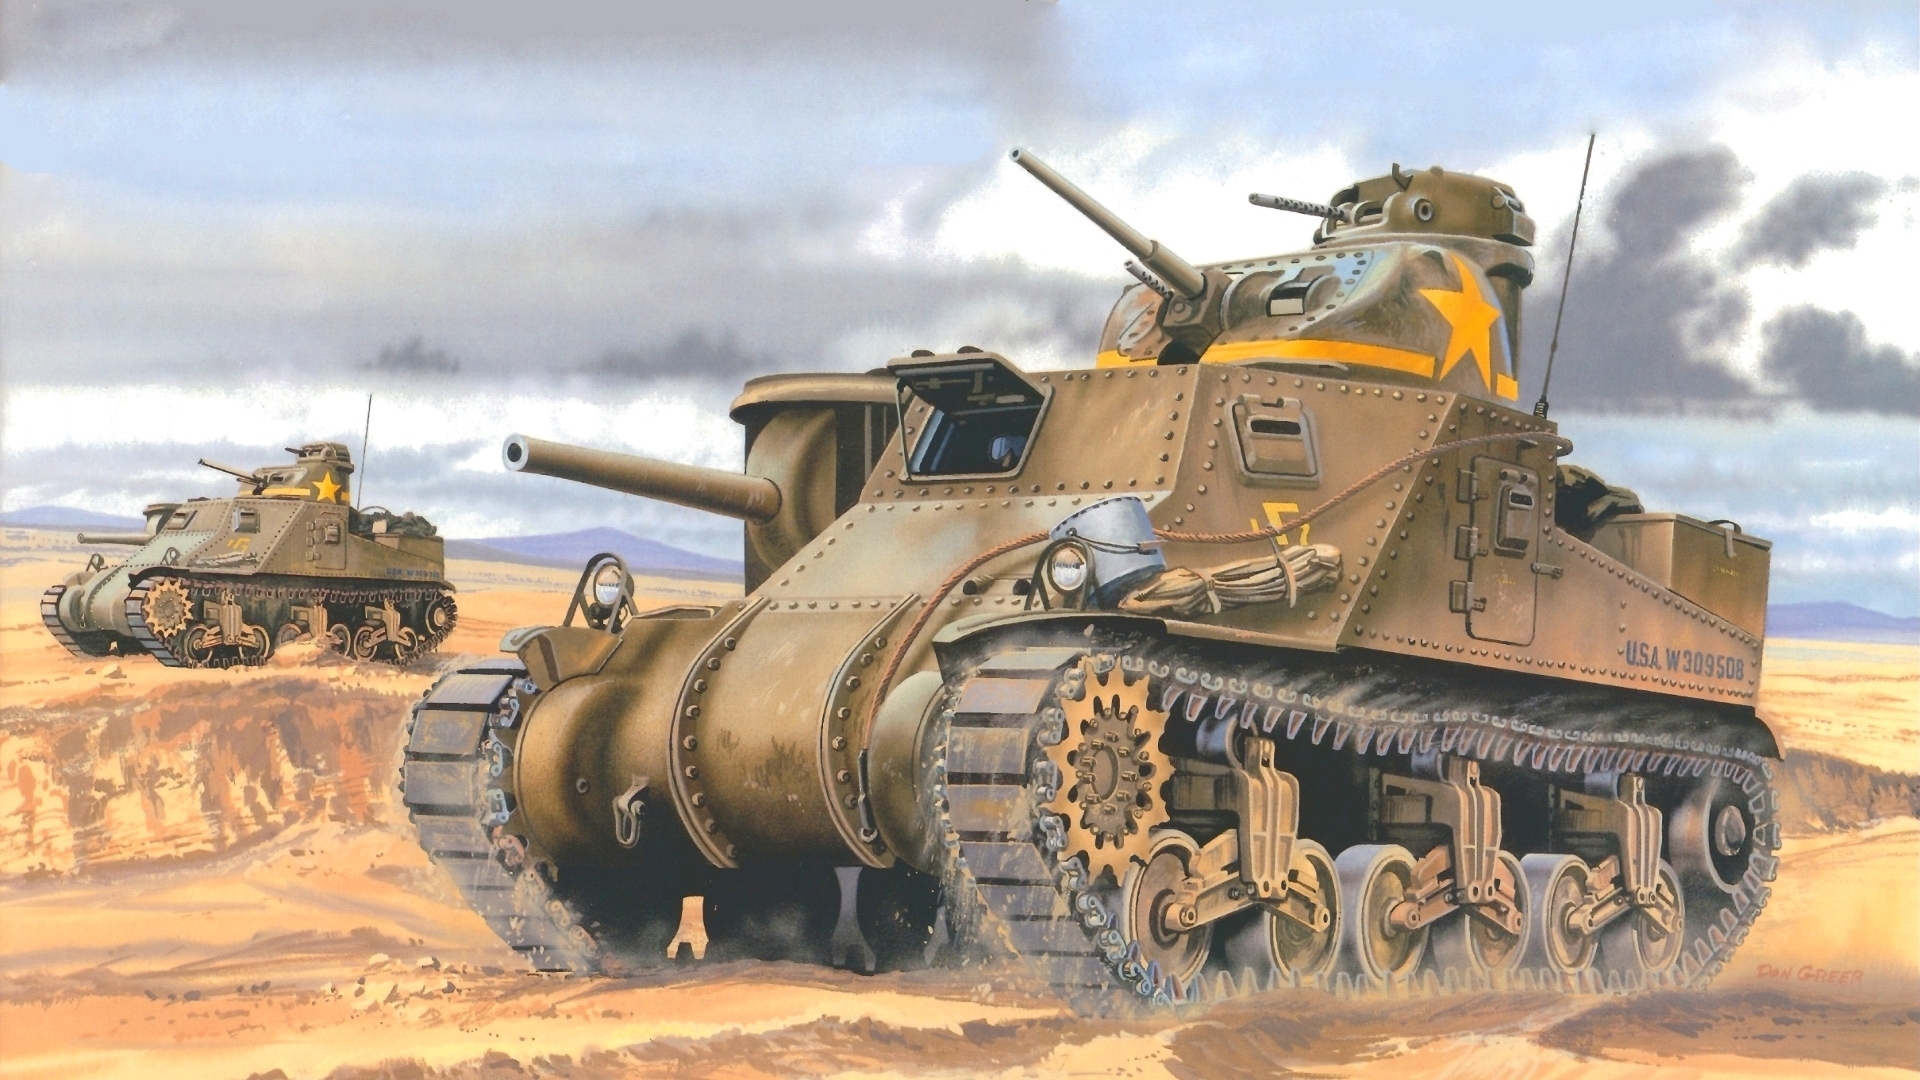 General 1920x1080 tank M3 Lee World War II Yellow Star military American tanks frontal view clouds signature sky